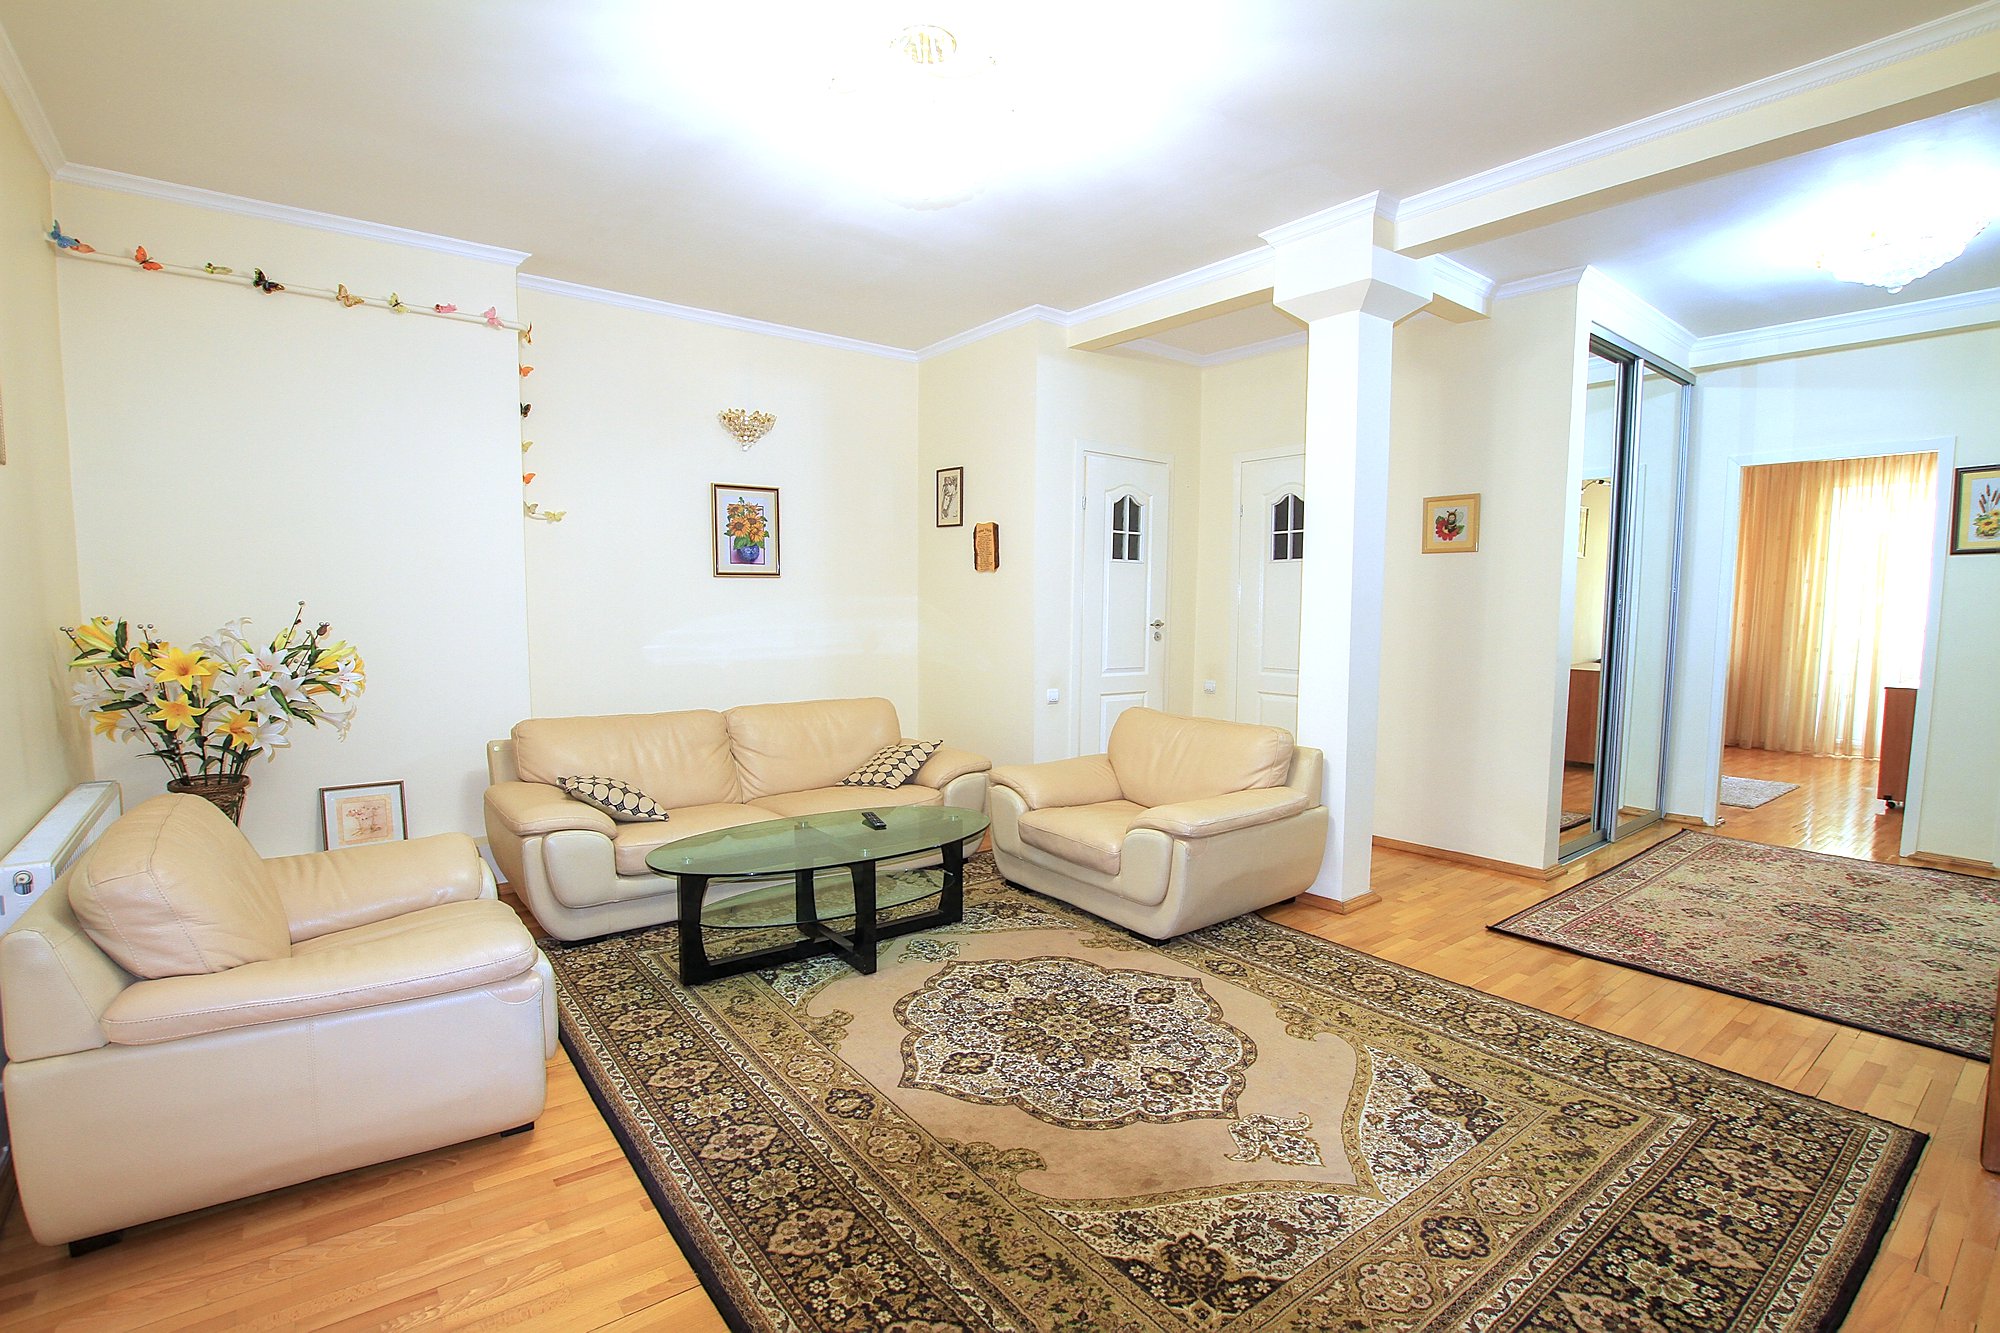 Chisinau Central park apartment for rent: 3 rooms, 2 bedrooms, 87 m²